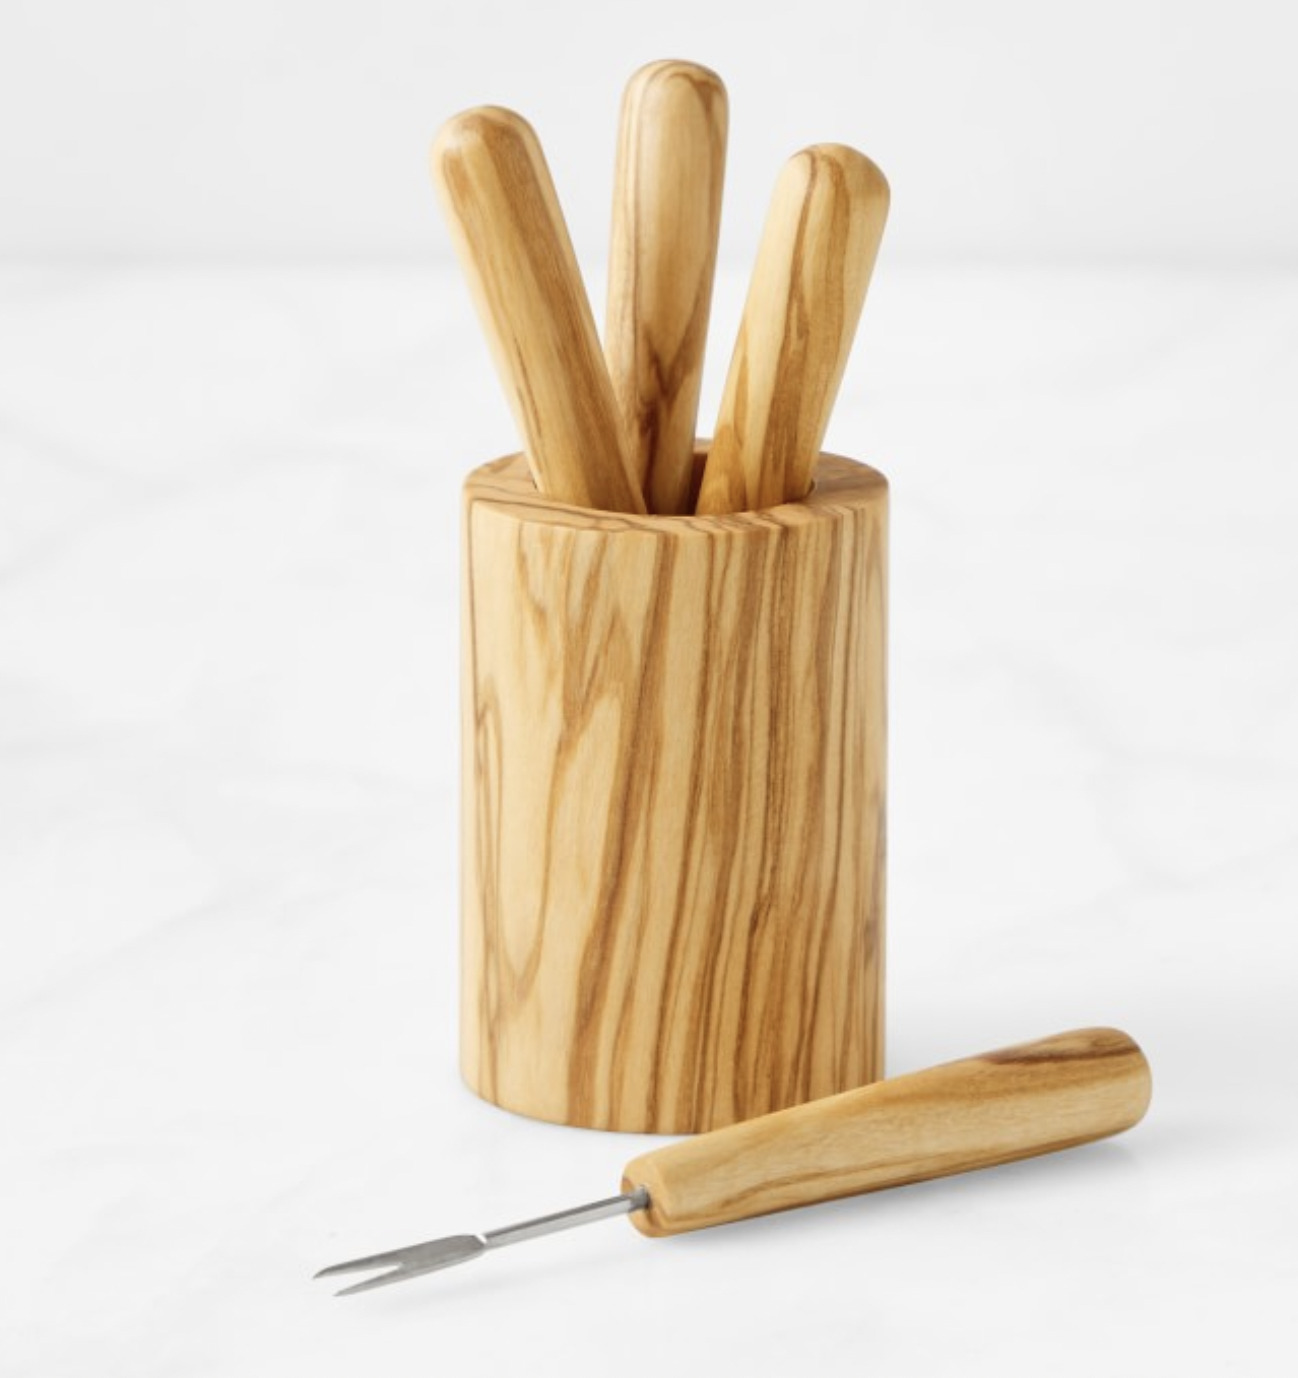 Olive wood toothpick skewers for charcuterie